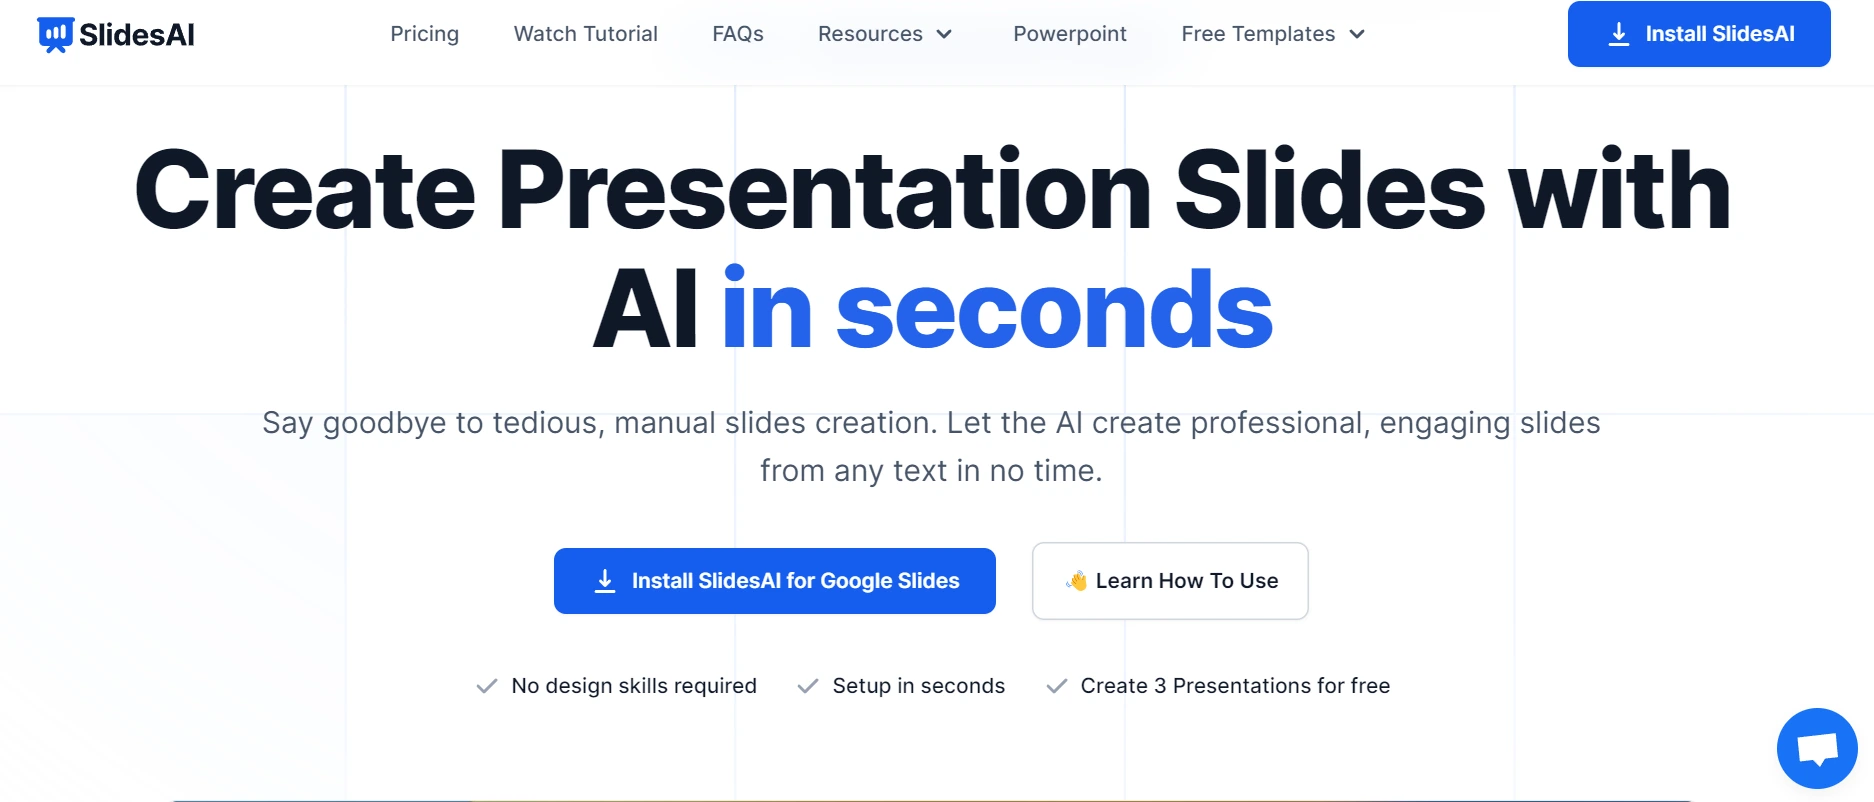 Slides AI is used to develop a presentation using ai revolution technology